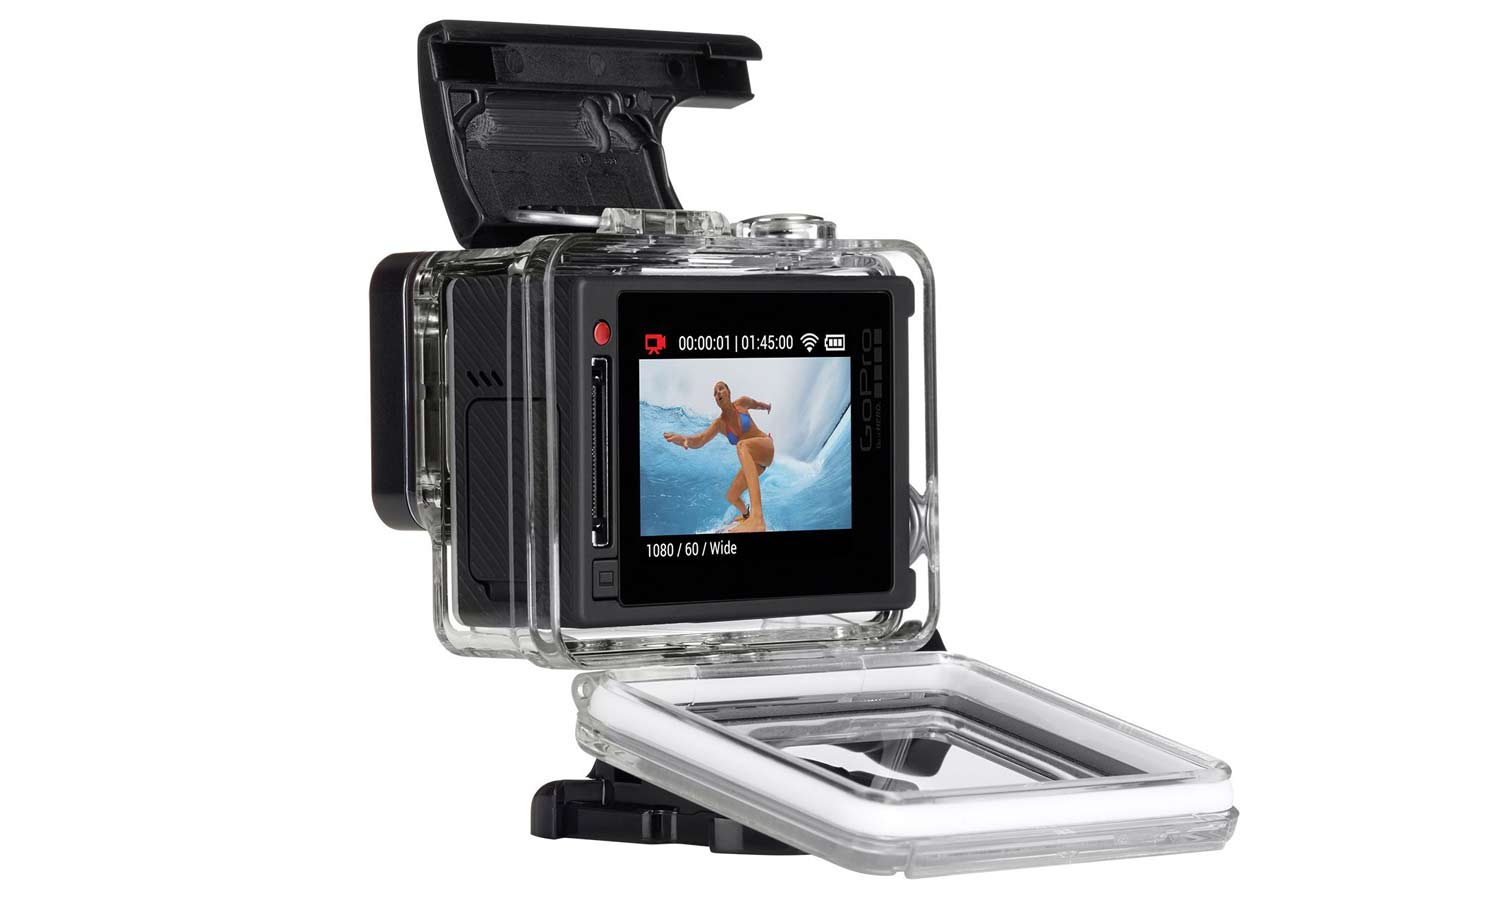 GoPro Hero4 Silver Review: A Superior Action Cam | Tom's Guide